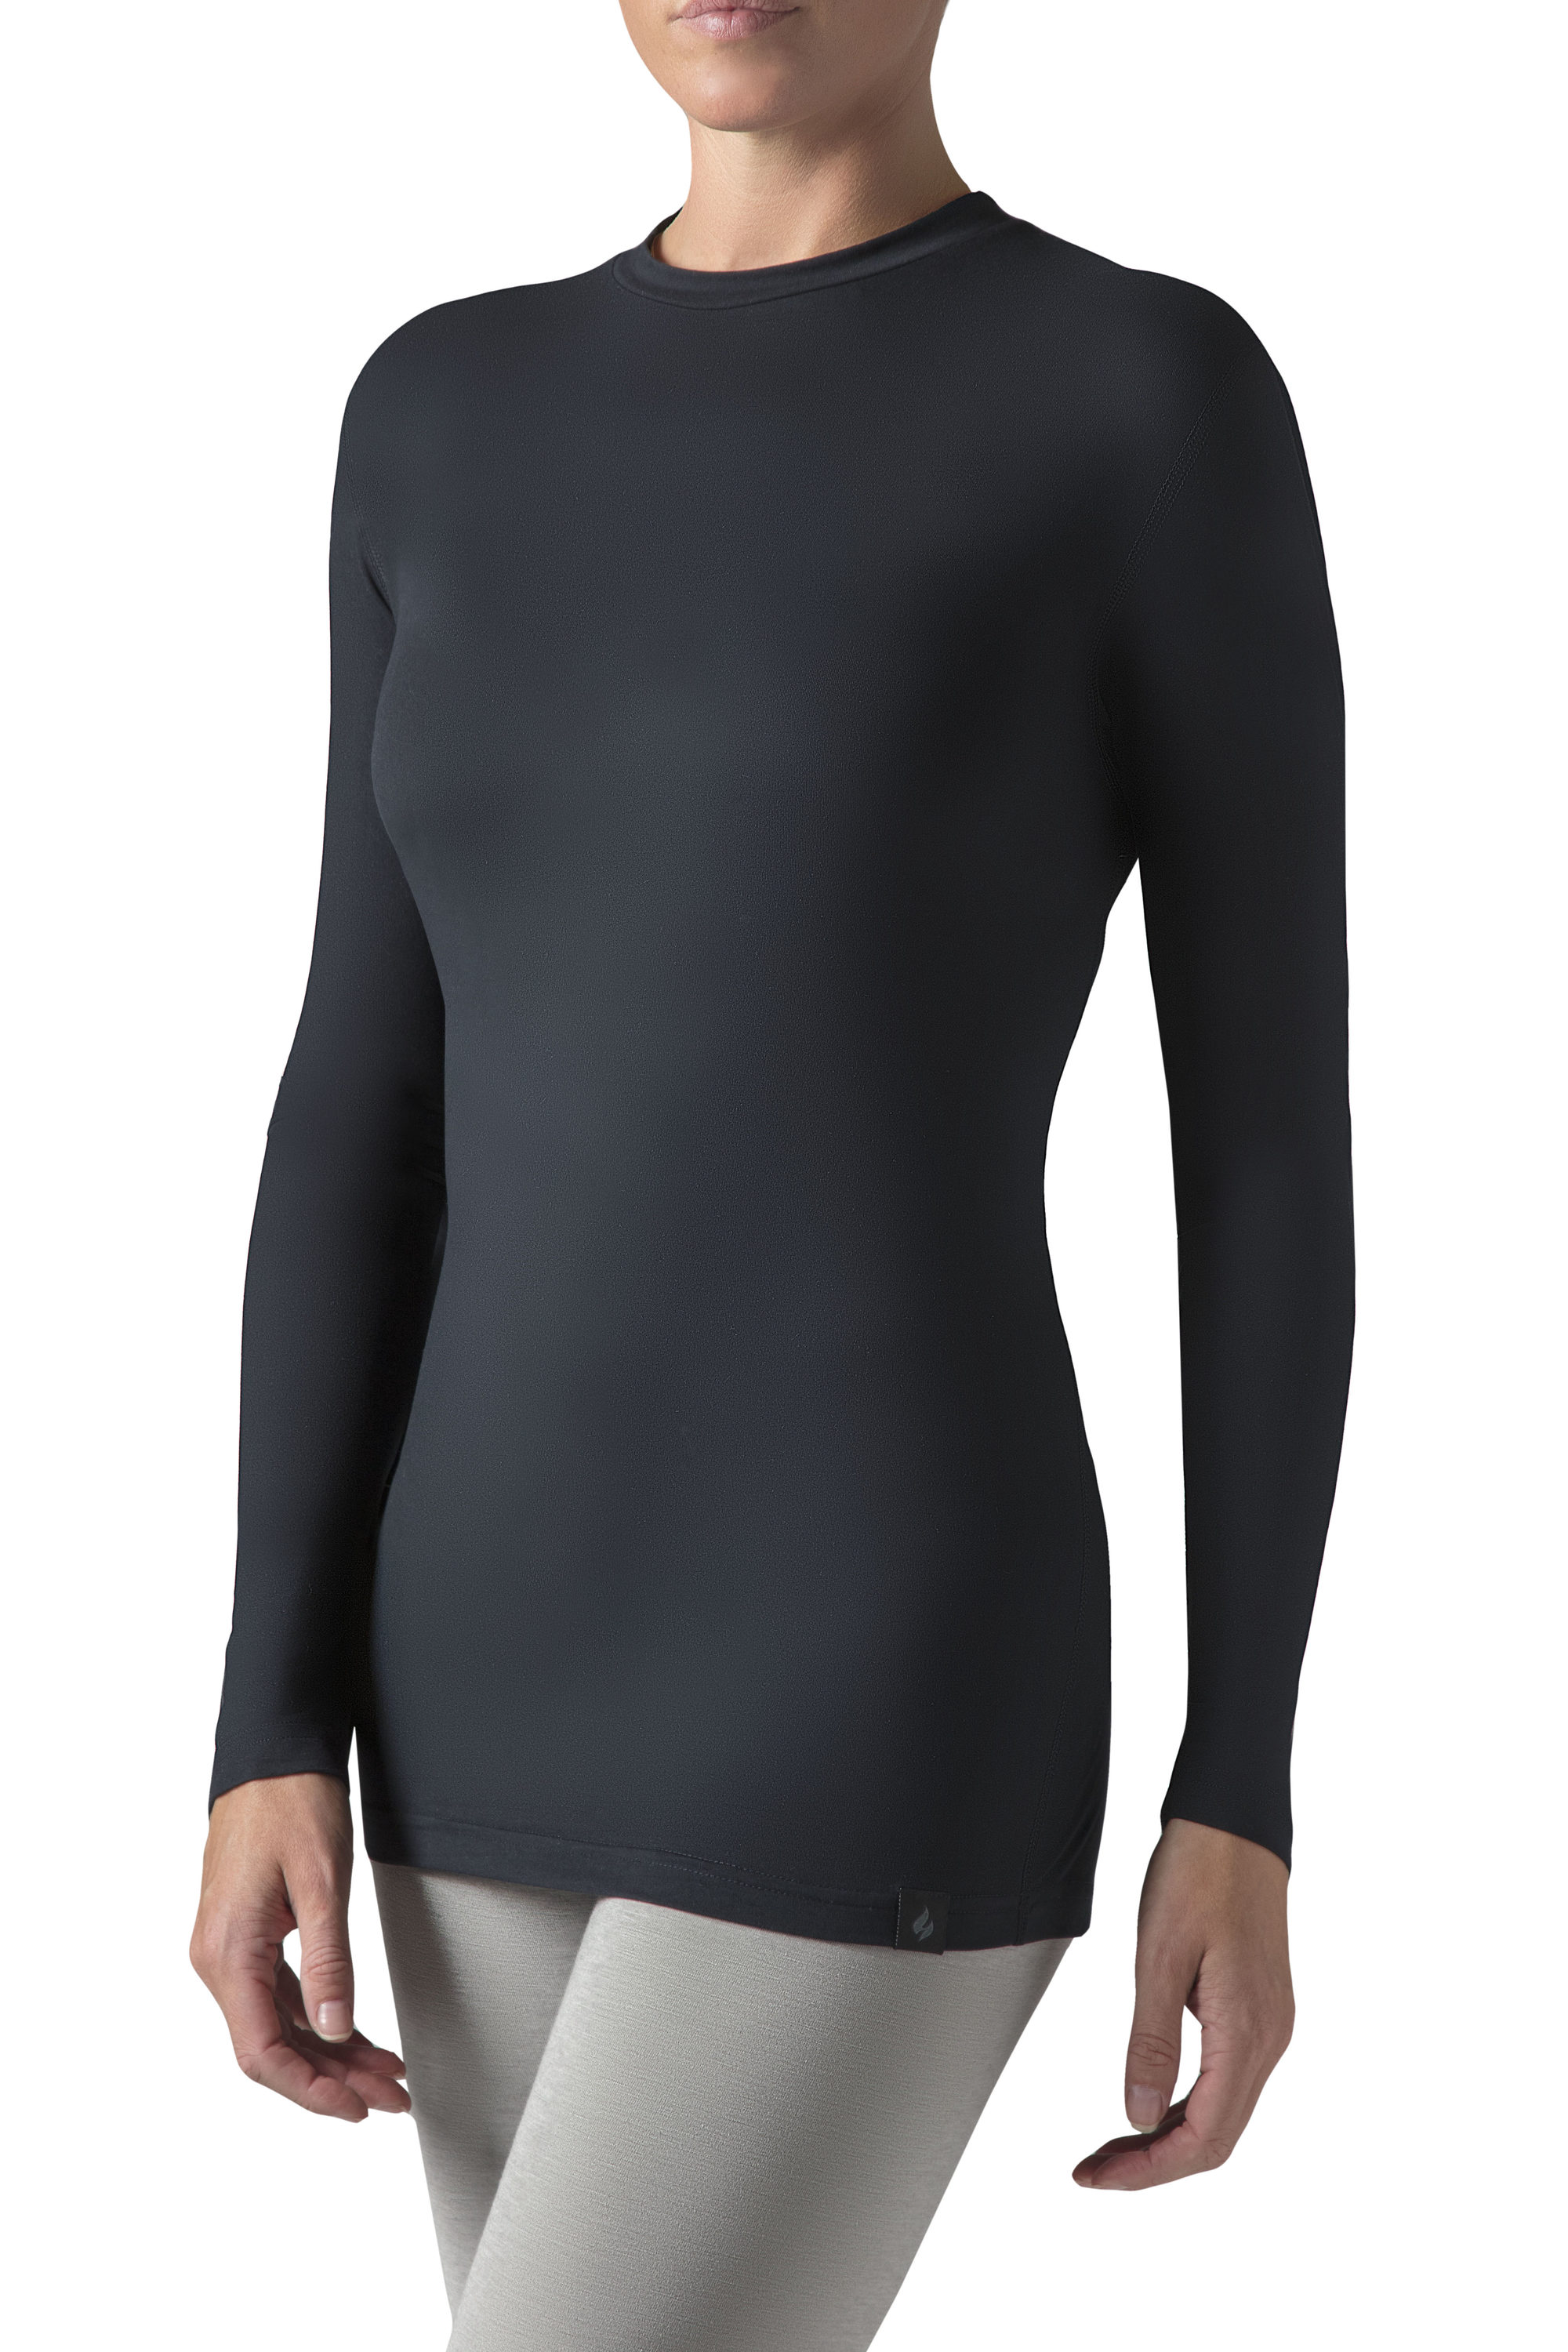 Heat Holders Black Polyester Thermal Base Layer (Medium) in the Thermals  department at